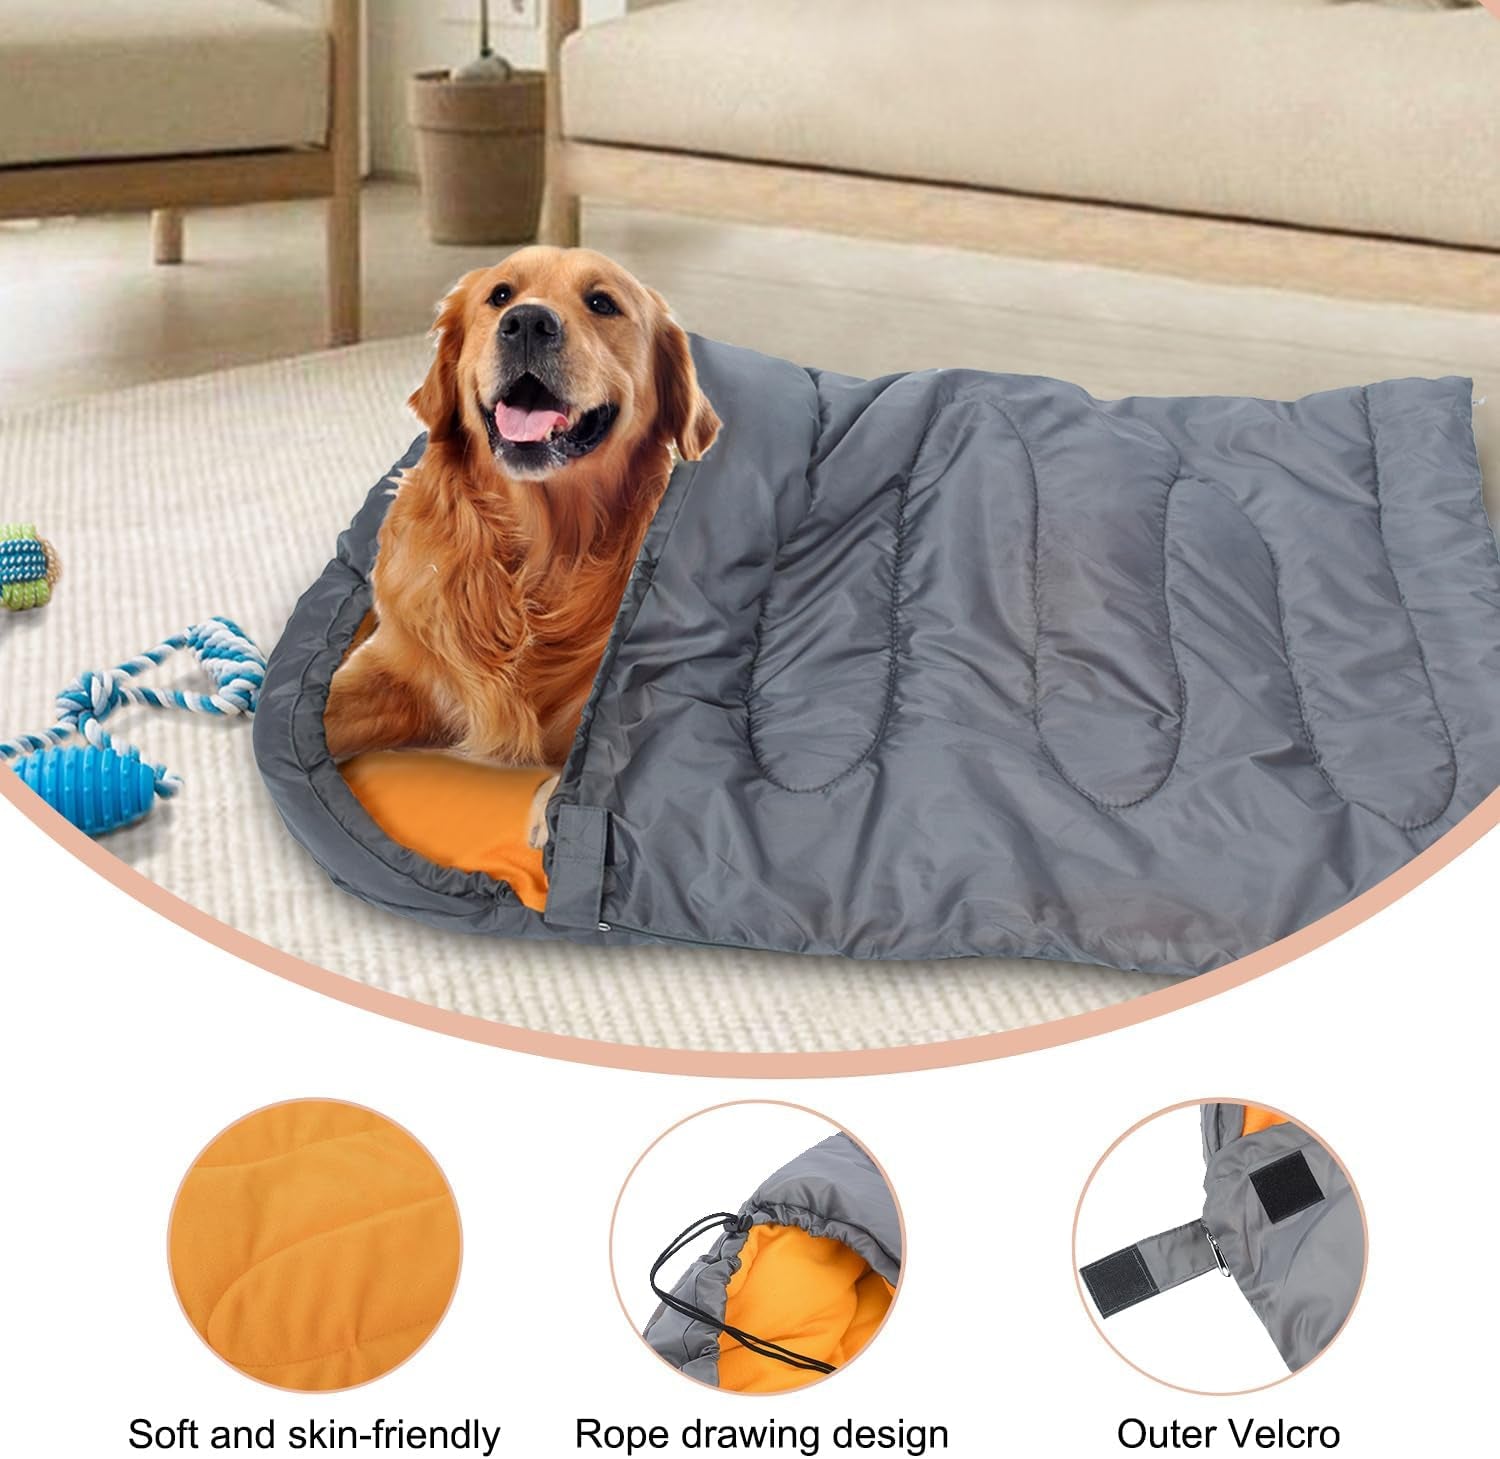 Dog Sleeping Bag, Waterproof Warm Cat Sleeping Bag, Camping Essentials Pet Bed with Storage Bag for Indoor Outdoor Travel Hiking Backpacking (Grey, L)